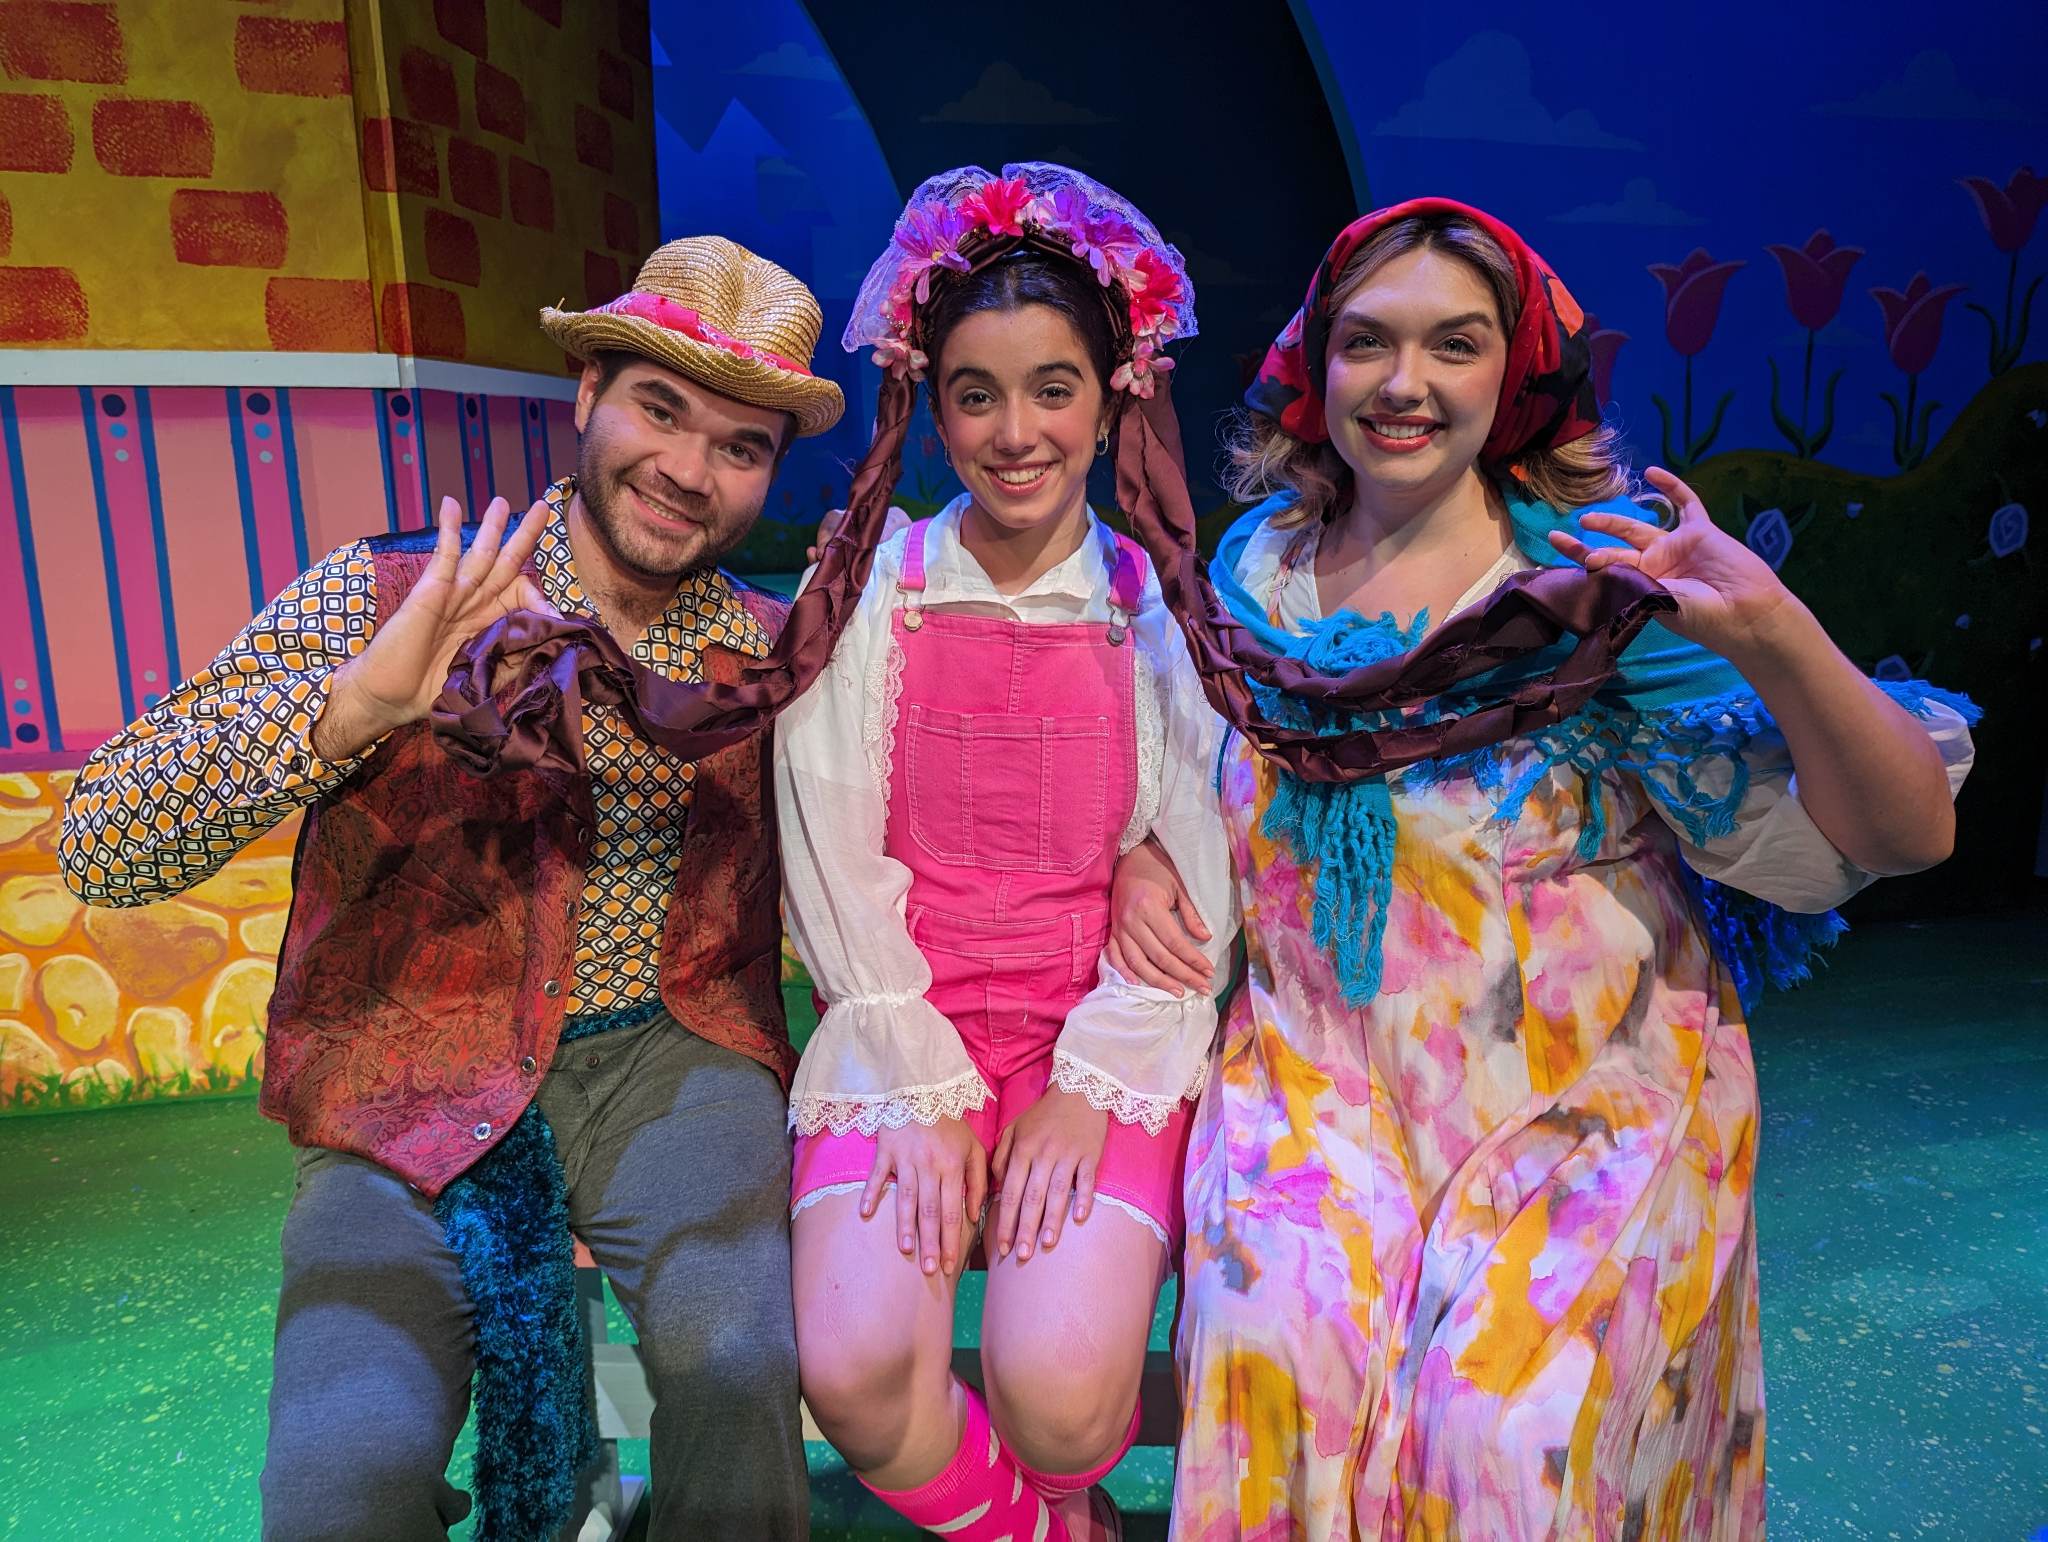 Eric (Stephen Denning) and Mary (Maria Hefte) share a light hearted moment with their daughter Rapunzel (Kelly Laines)